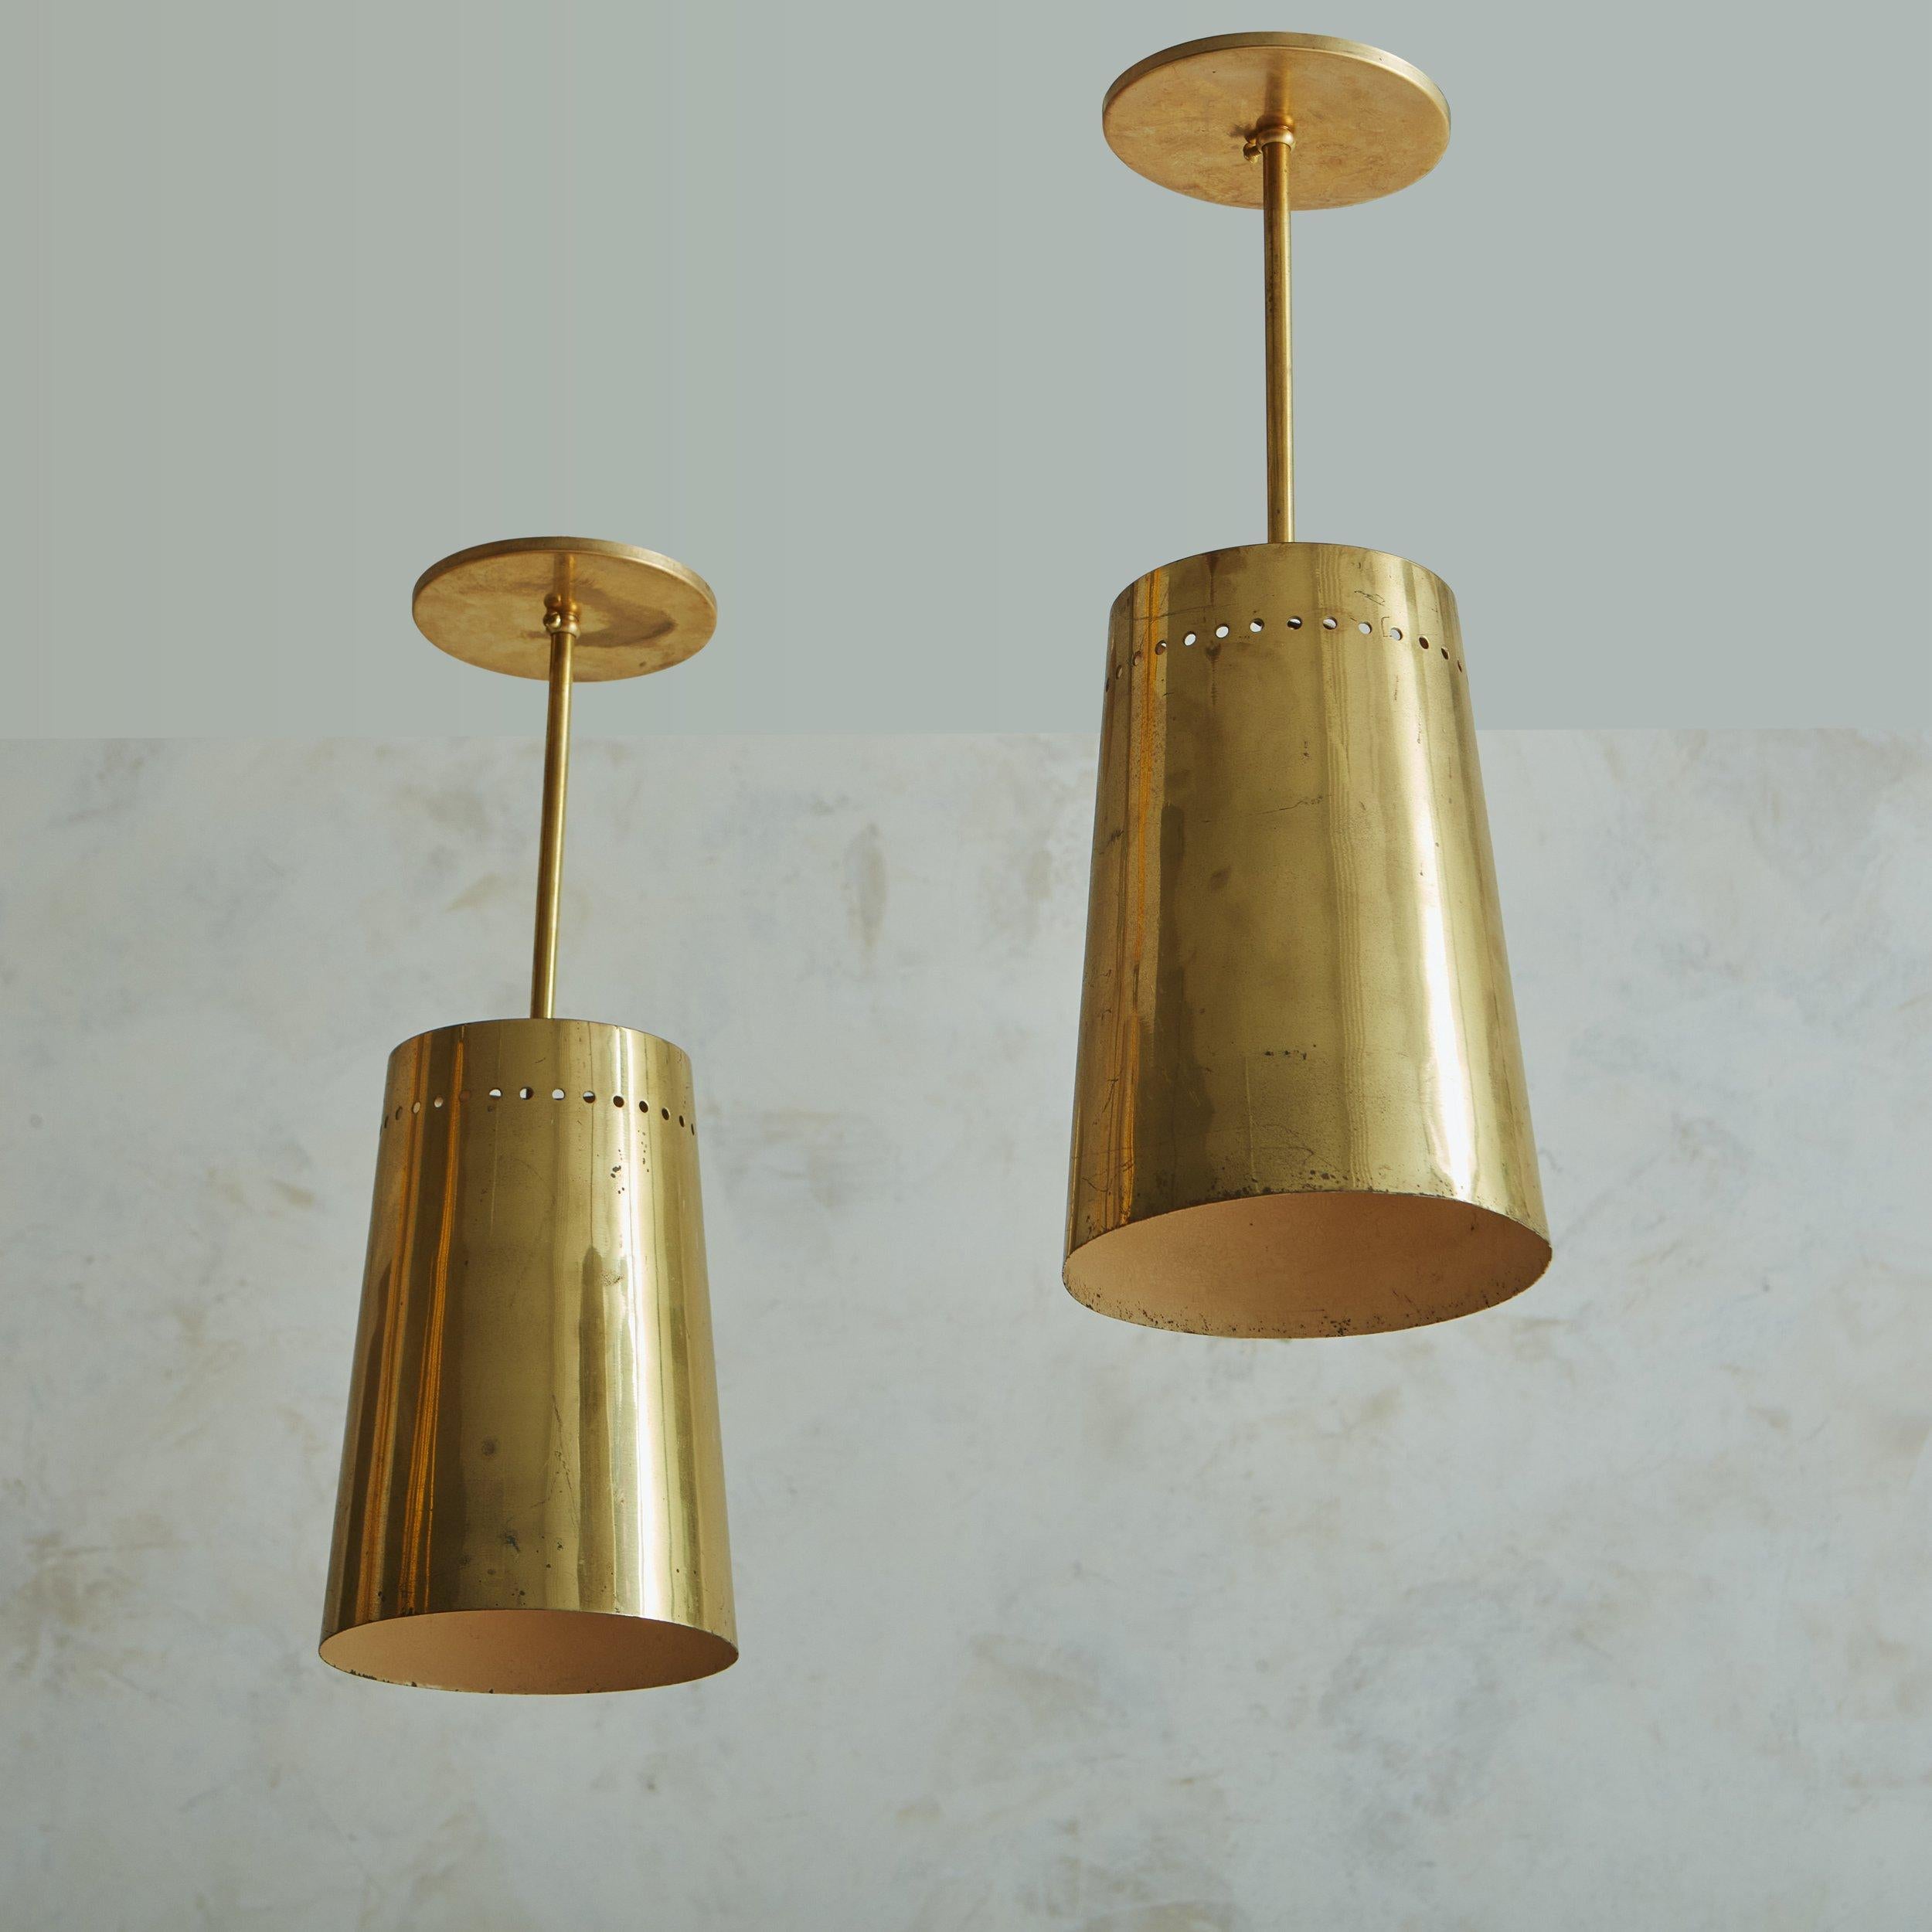 Italian Vintage Brass Pendant Light with Perforated Trim - 2 Available For Sale